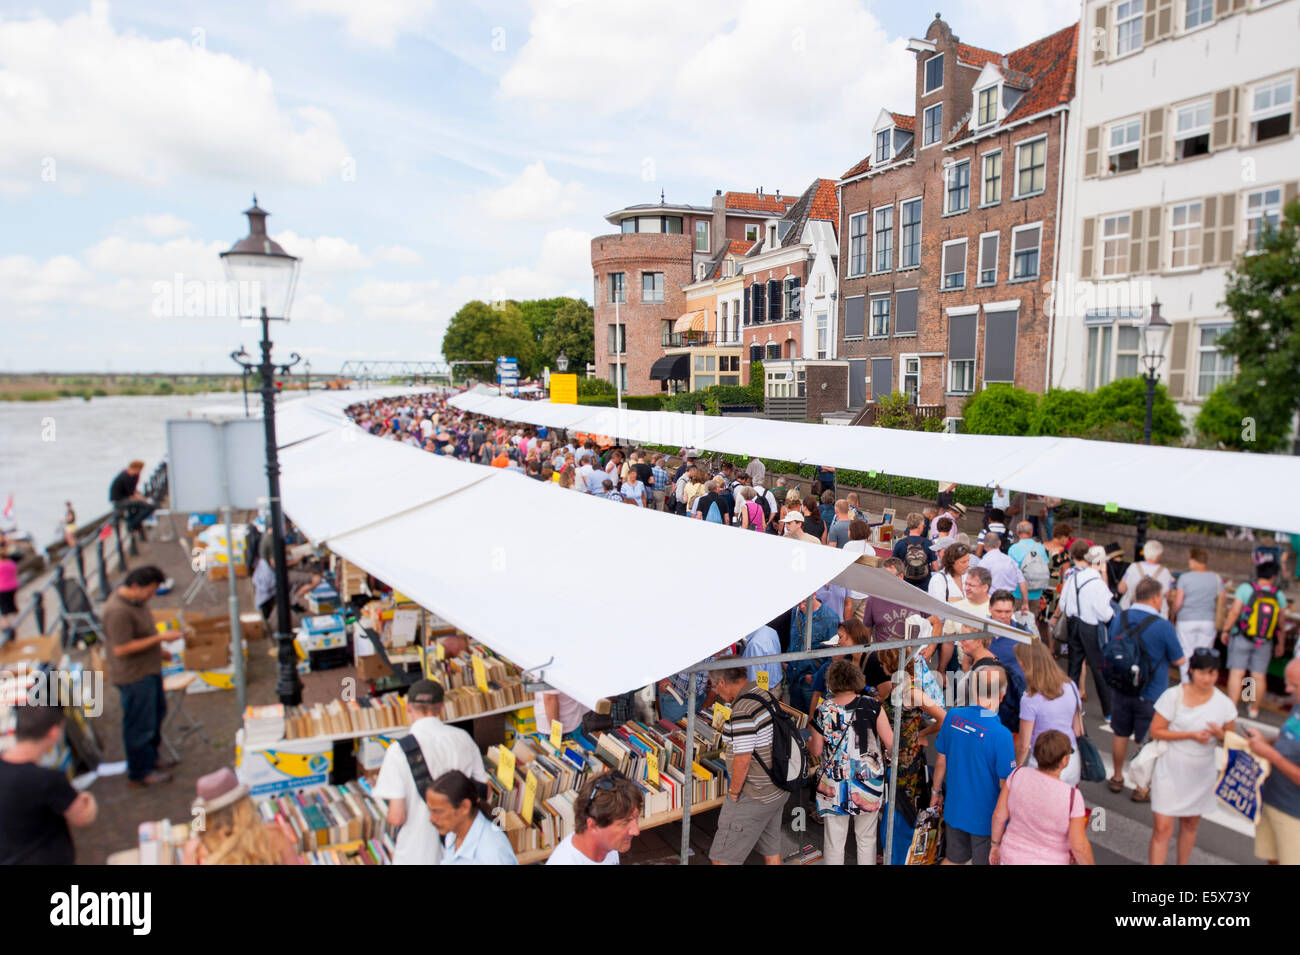 A long queue of market stalls with shopping people at the annual Deventer book market. Stock Photo